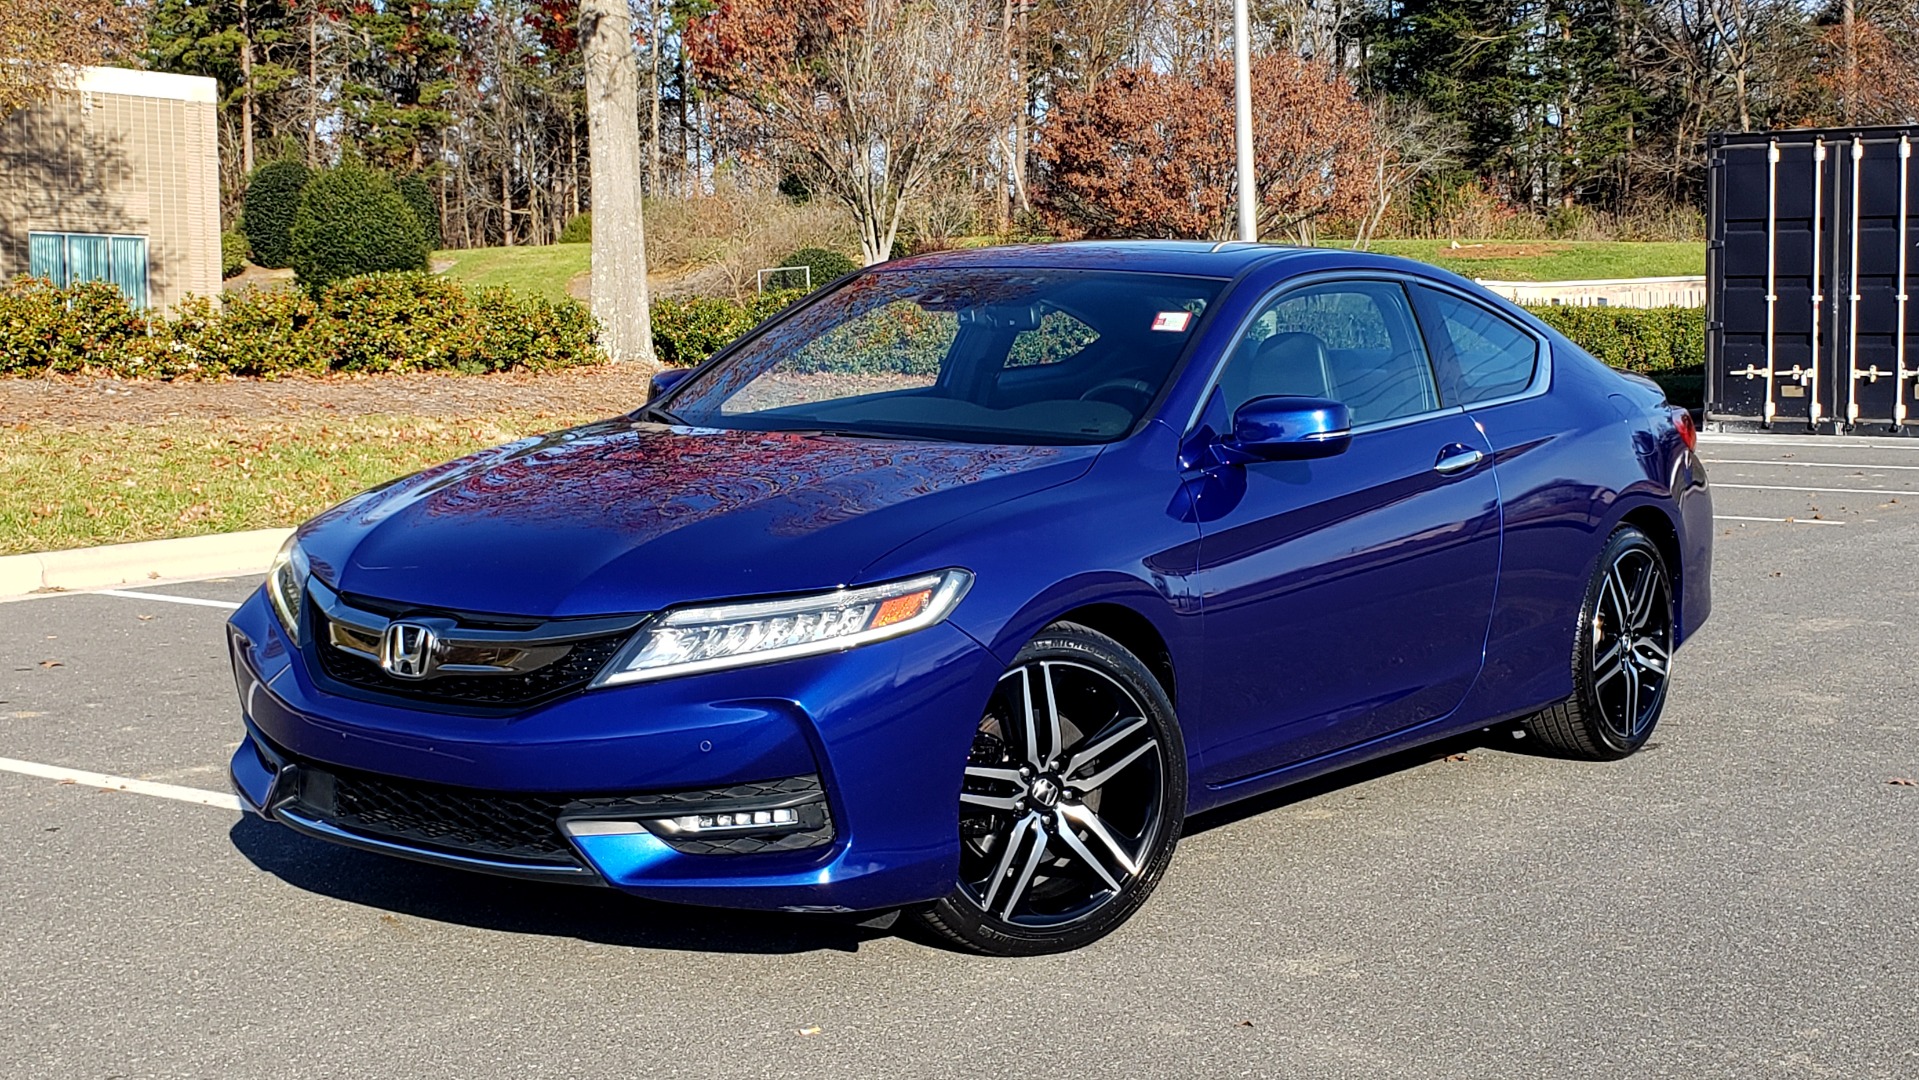 Used 2017 Honda ACCORD COUPE TOURING V6 / 2-DR / NAV / SUNROOF / LANEWATCH / CMBS for sale Sold at Formula Imports in Charlotte NC 28227 1